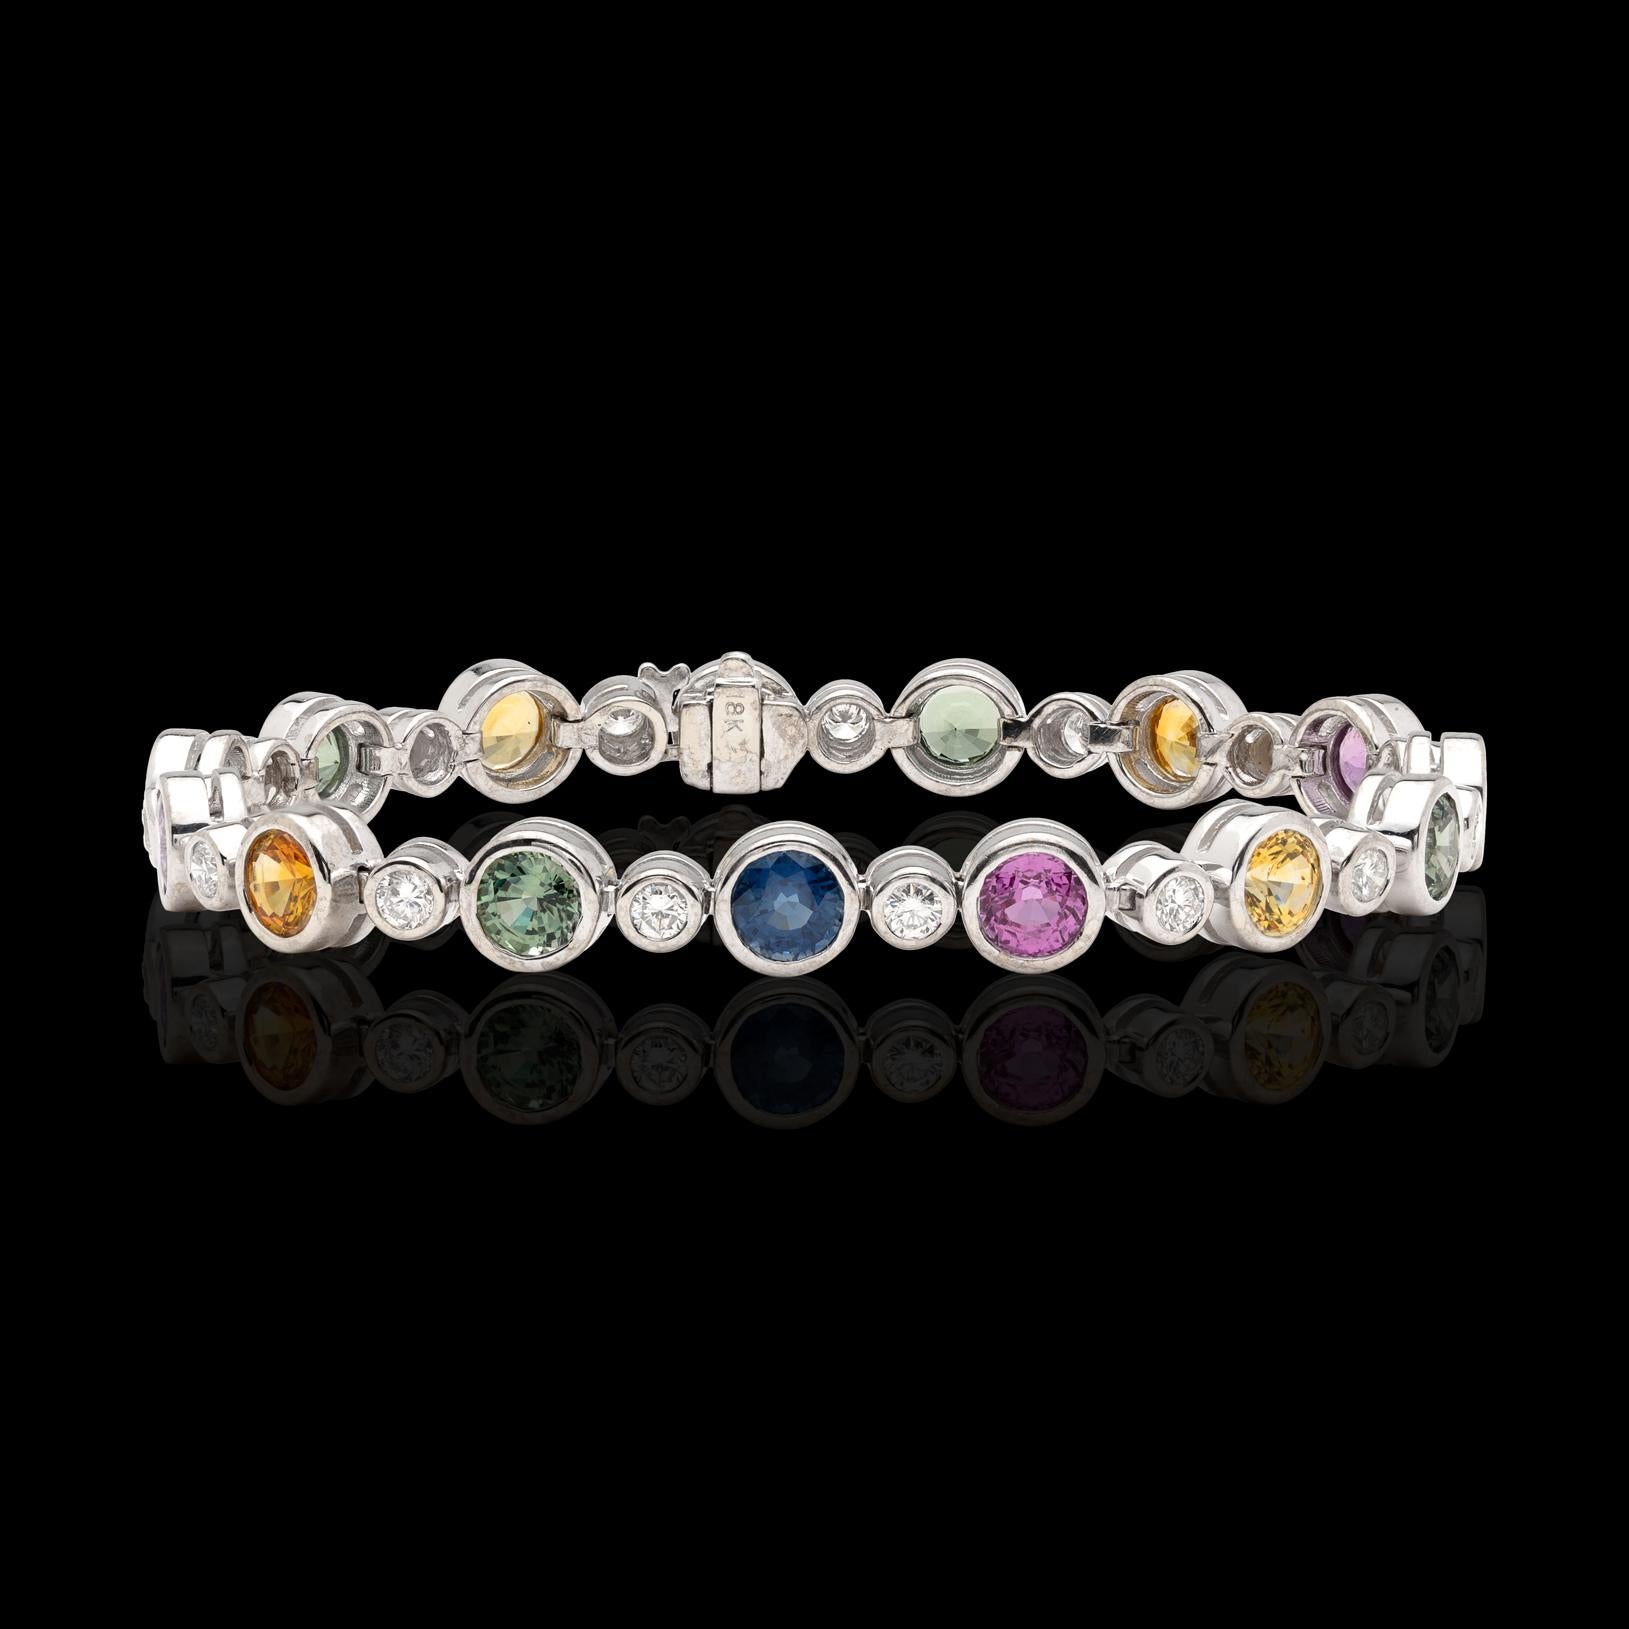 Colorful and contemporary, this link bracelet hits all the notes! With 15 bezel-set 1.00-ct. round sapphires ranging from blue, pink, and green to yellow (15 carats total weight!), and alternating with bezel-set round brilliant-cut diamonds, the